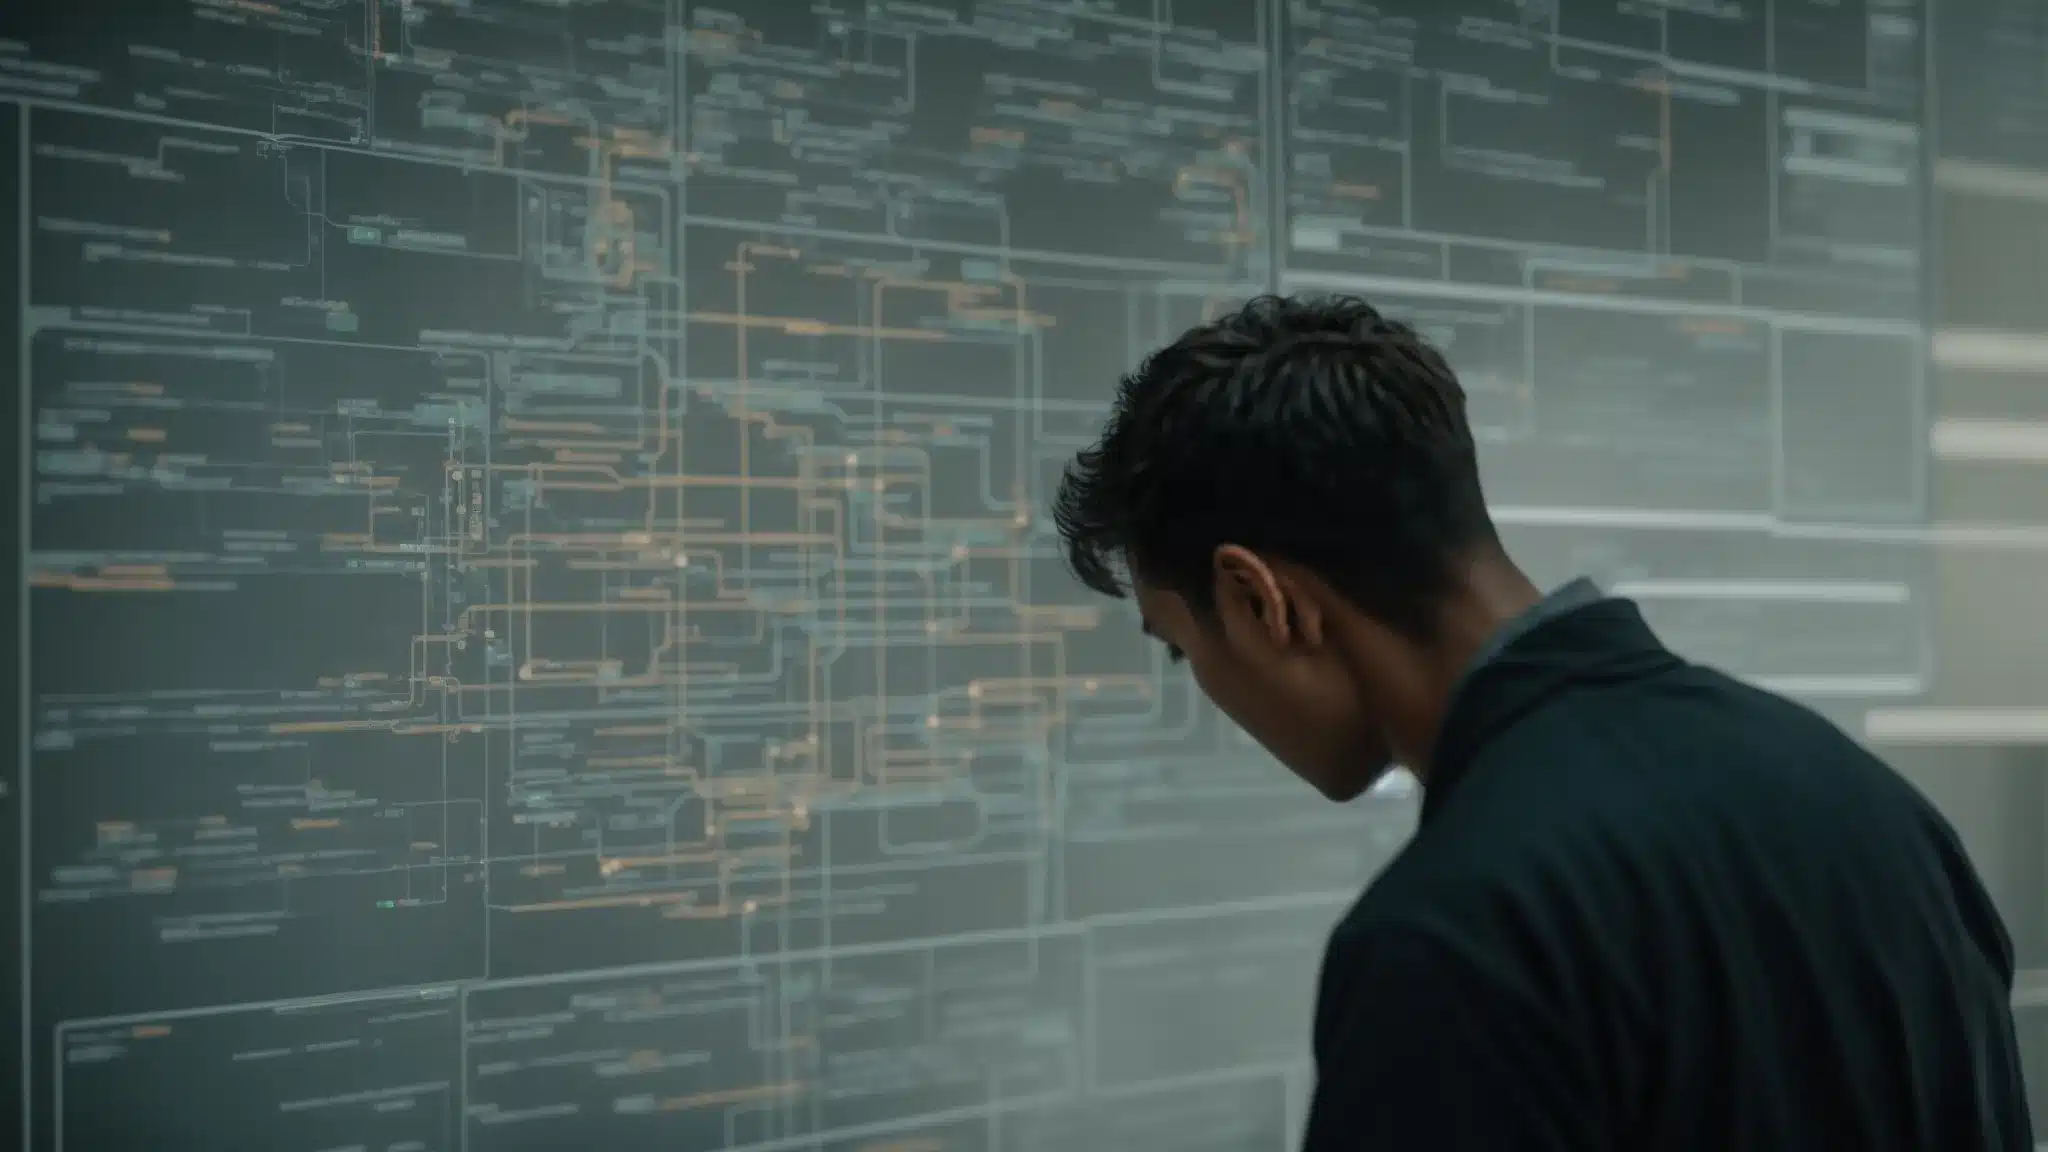 A Close-Up Of A Person Examining A Complex Flowchart With Various Connected Keywords And Geographic Markers On A Digital Screen.